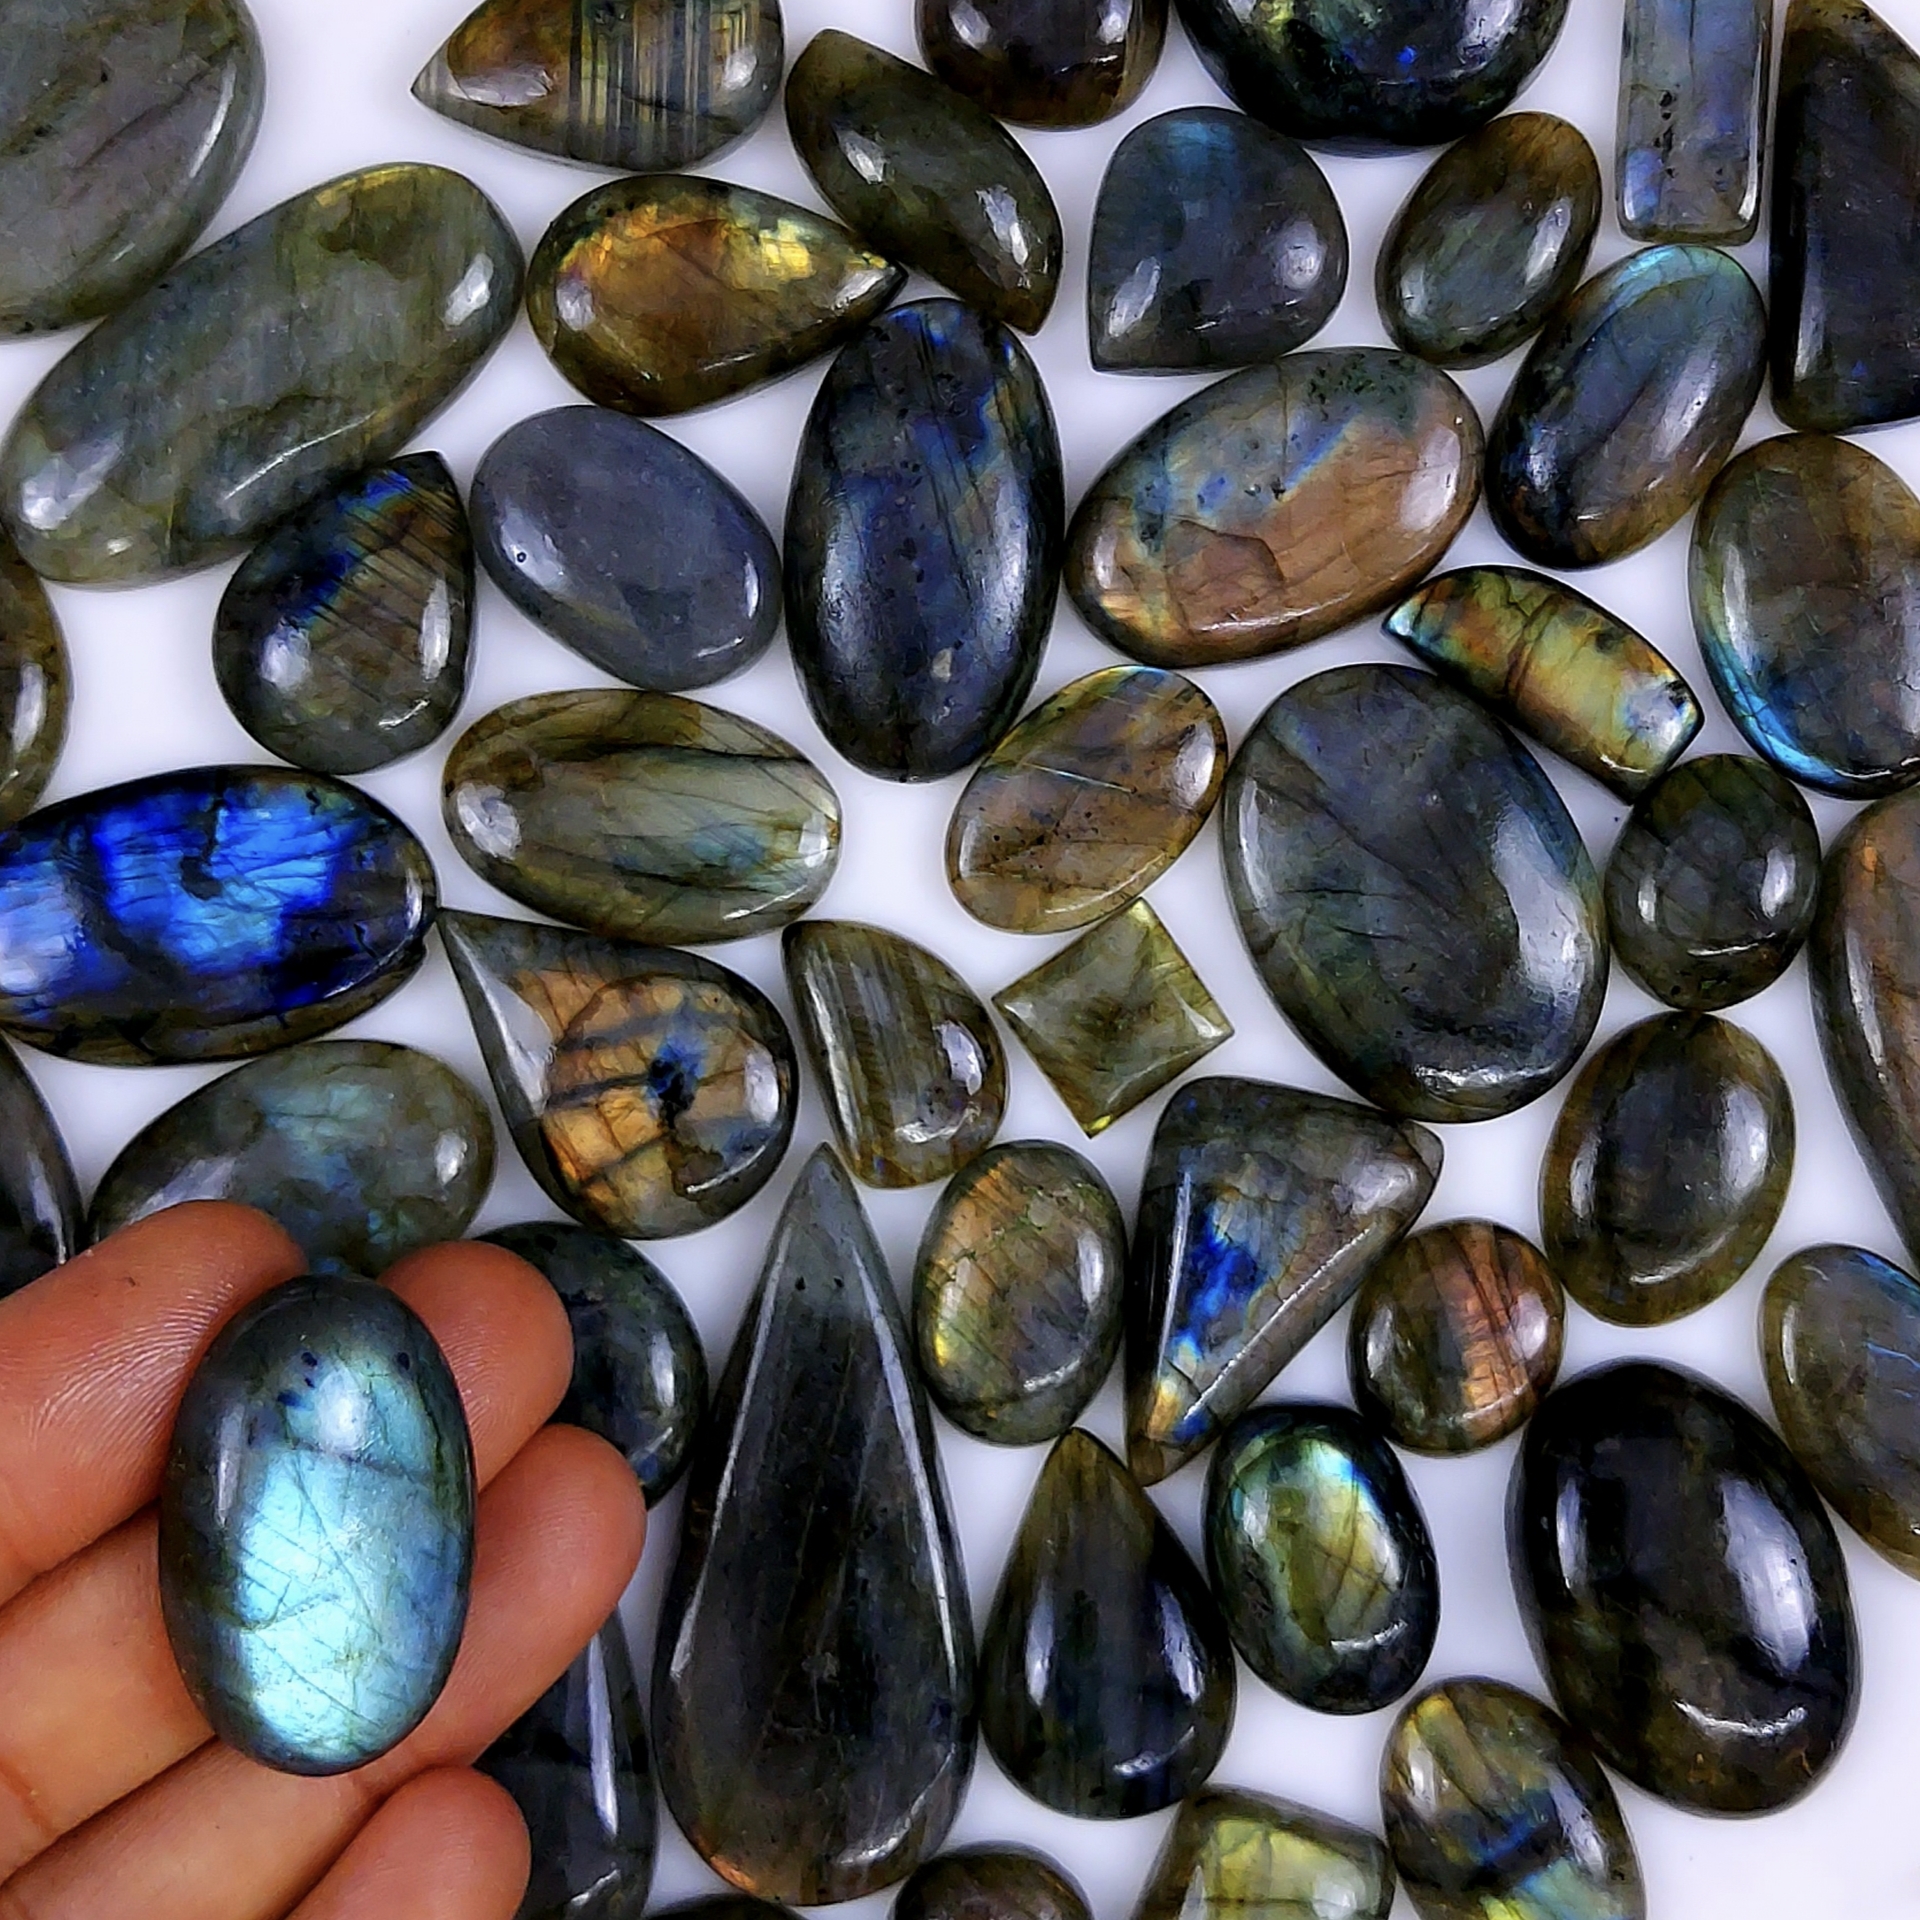 49pc 1728Cts Labradorite Cabochon Multifire Healing Crystal For Jewelry Supplies, Labradorite Necklace Handmade Wire Wrapped Gemstone Pendant 58x22 14x12mm#6279